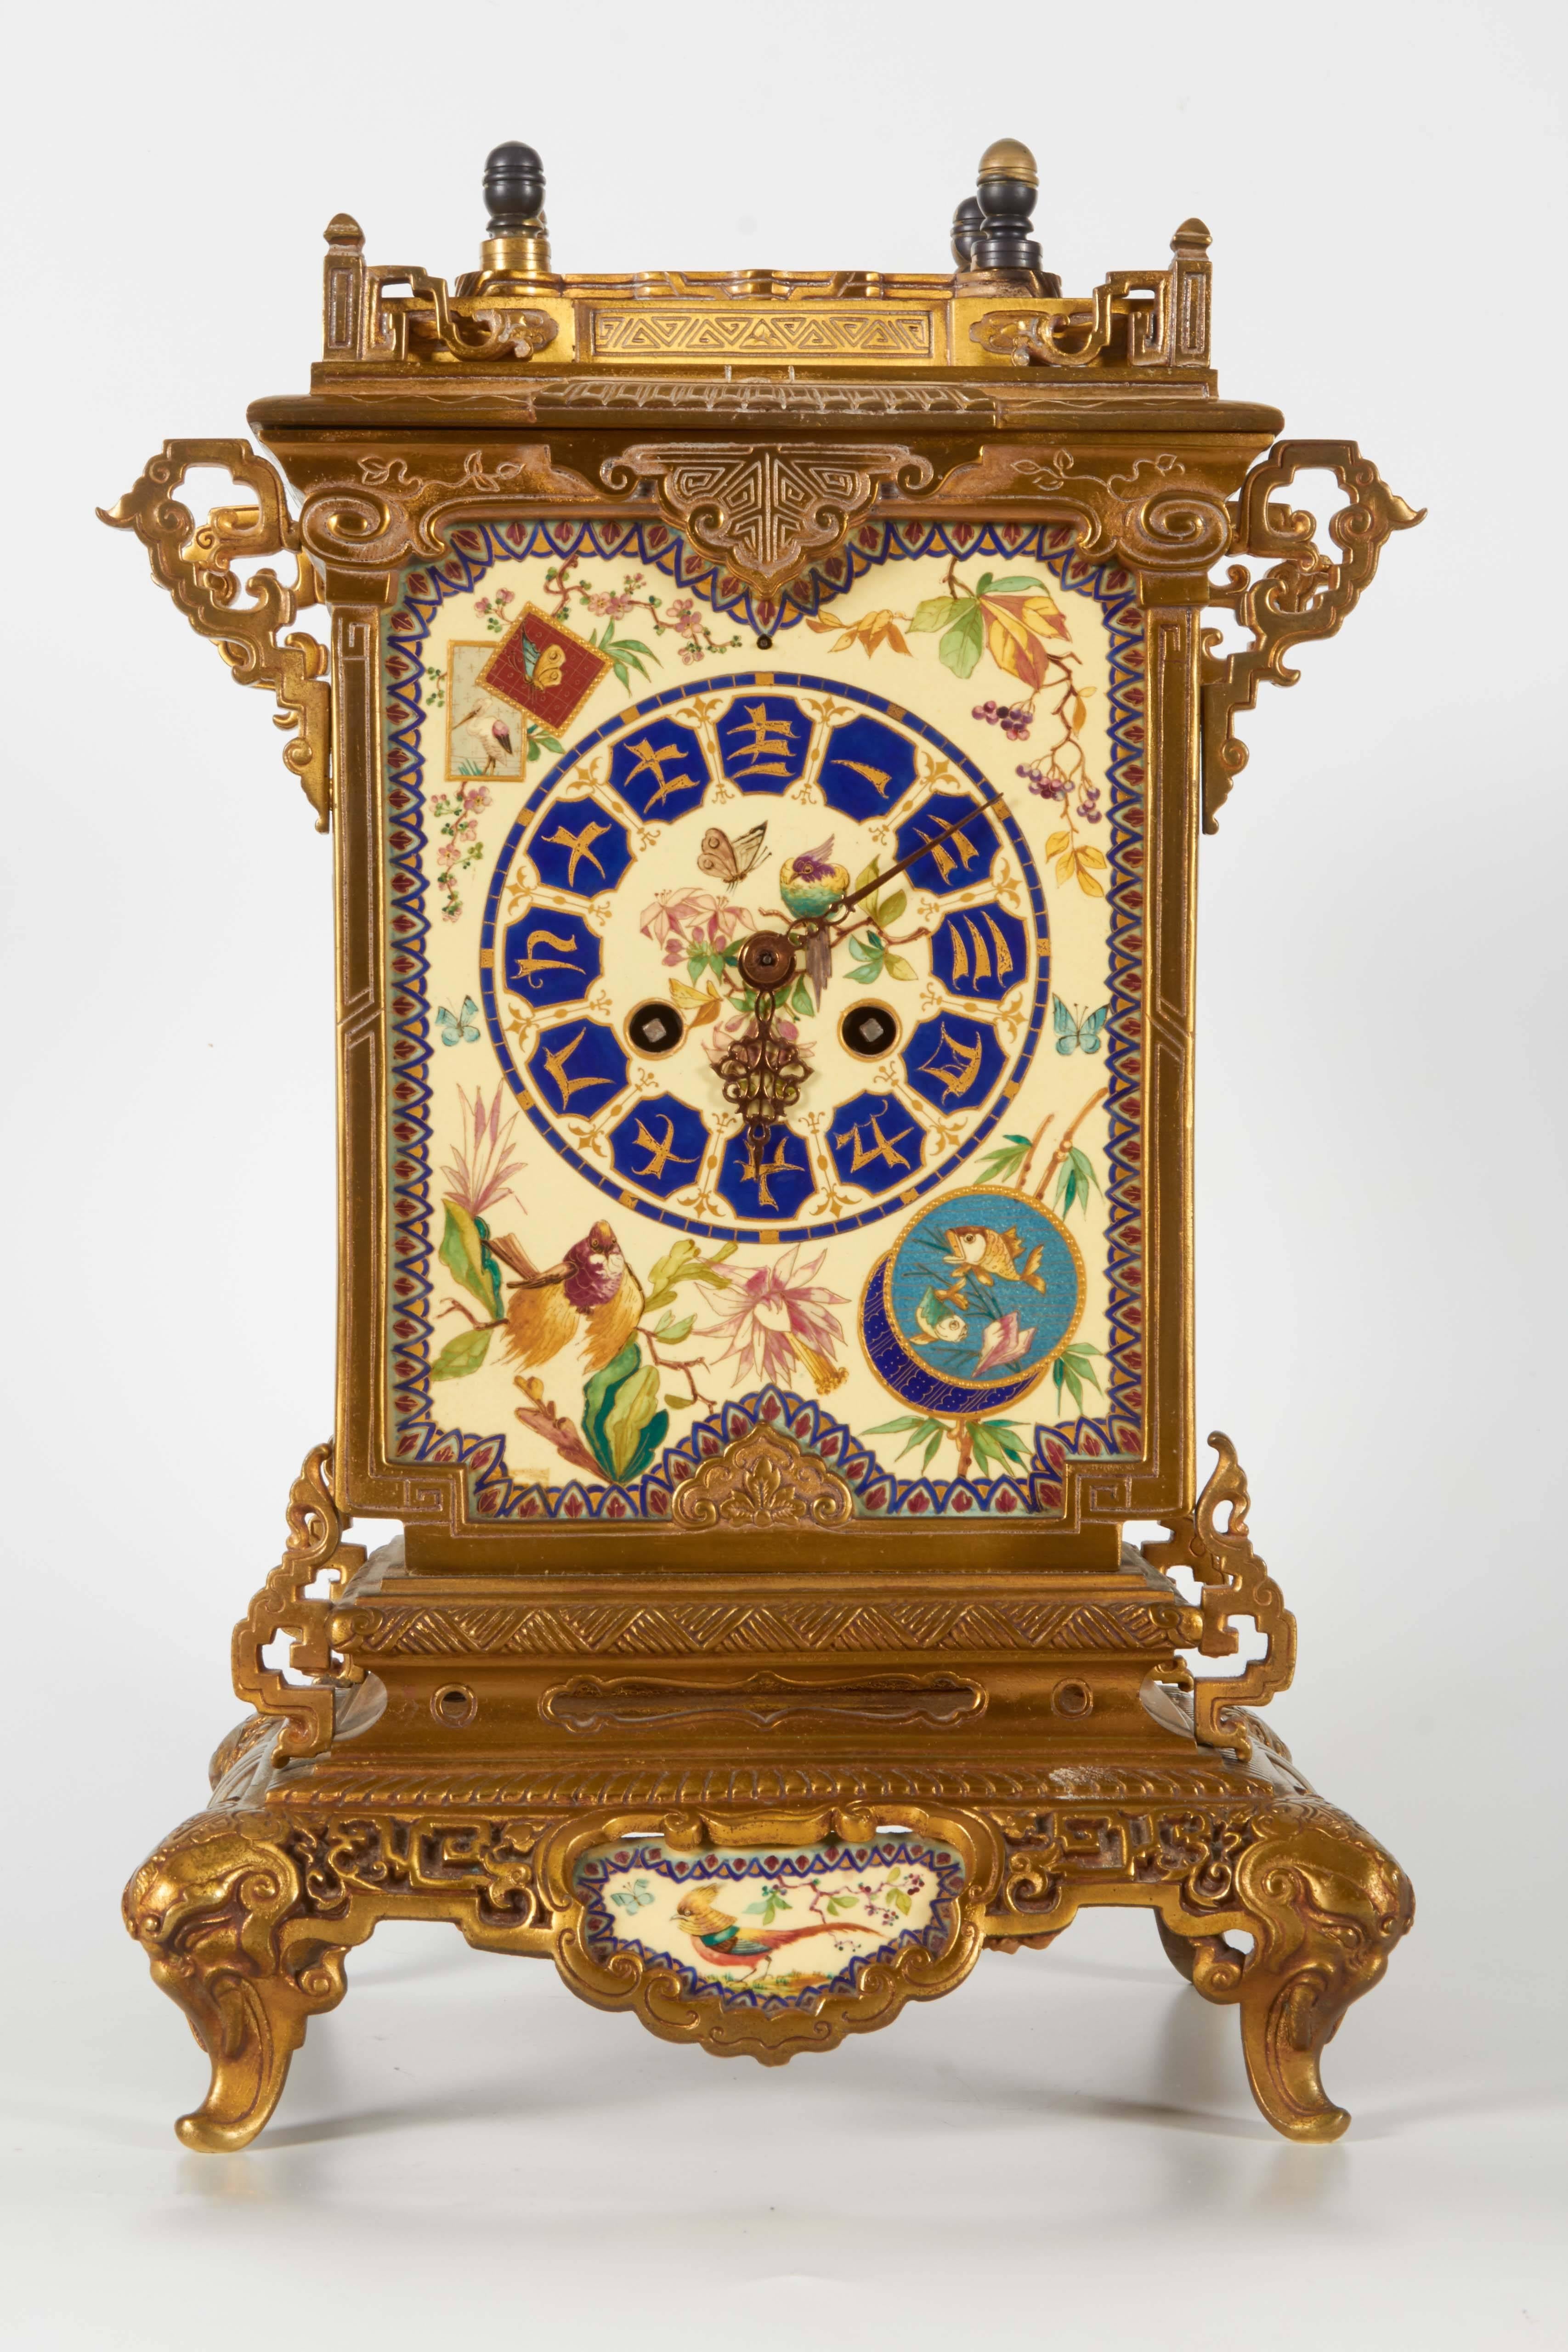 A very unusual and quite rare 19th century French chinoiserie/Japanism dore bronze mounted and hand painted porcelain aesthetic movement clock, attributed to E. Lièvre, most probably cast by F. Barbedienne. This clock is expertly designed by the